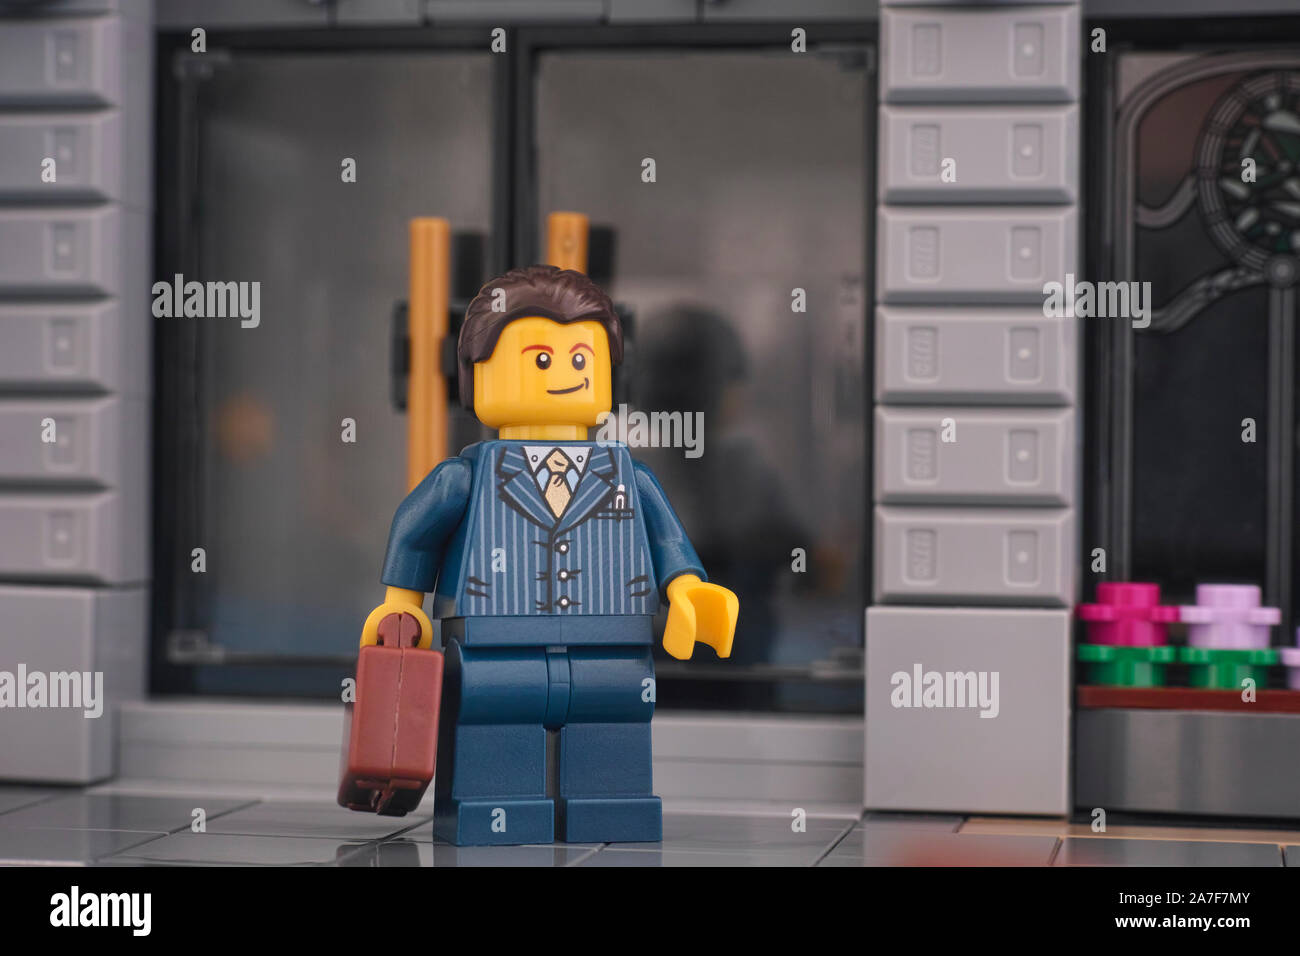 Tambov, Russian Federation - October 16, 2019 Lego businessman standing on the street in front of a bank. Stock Photo